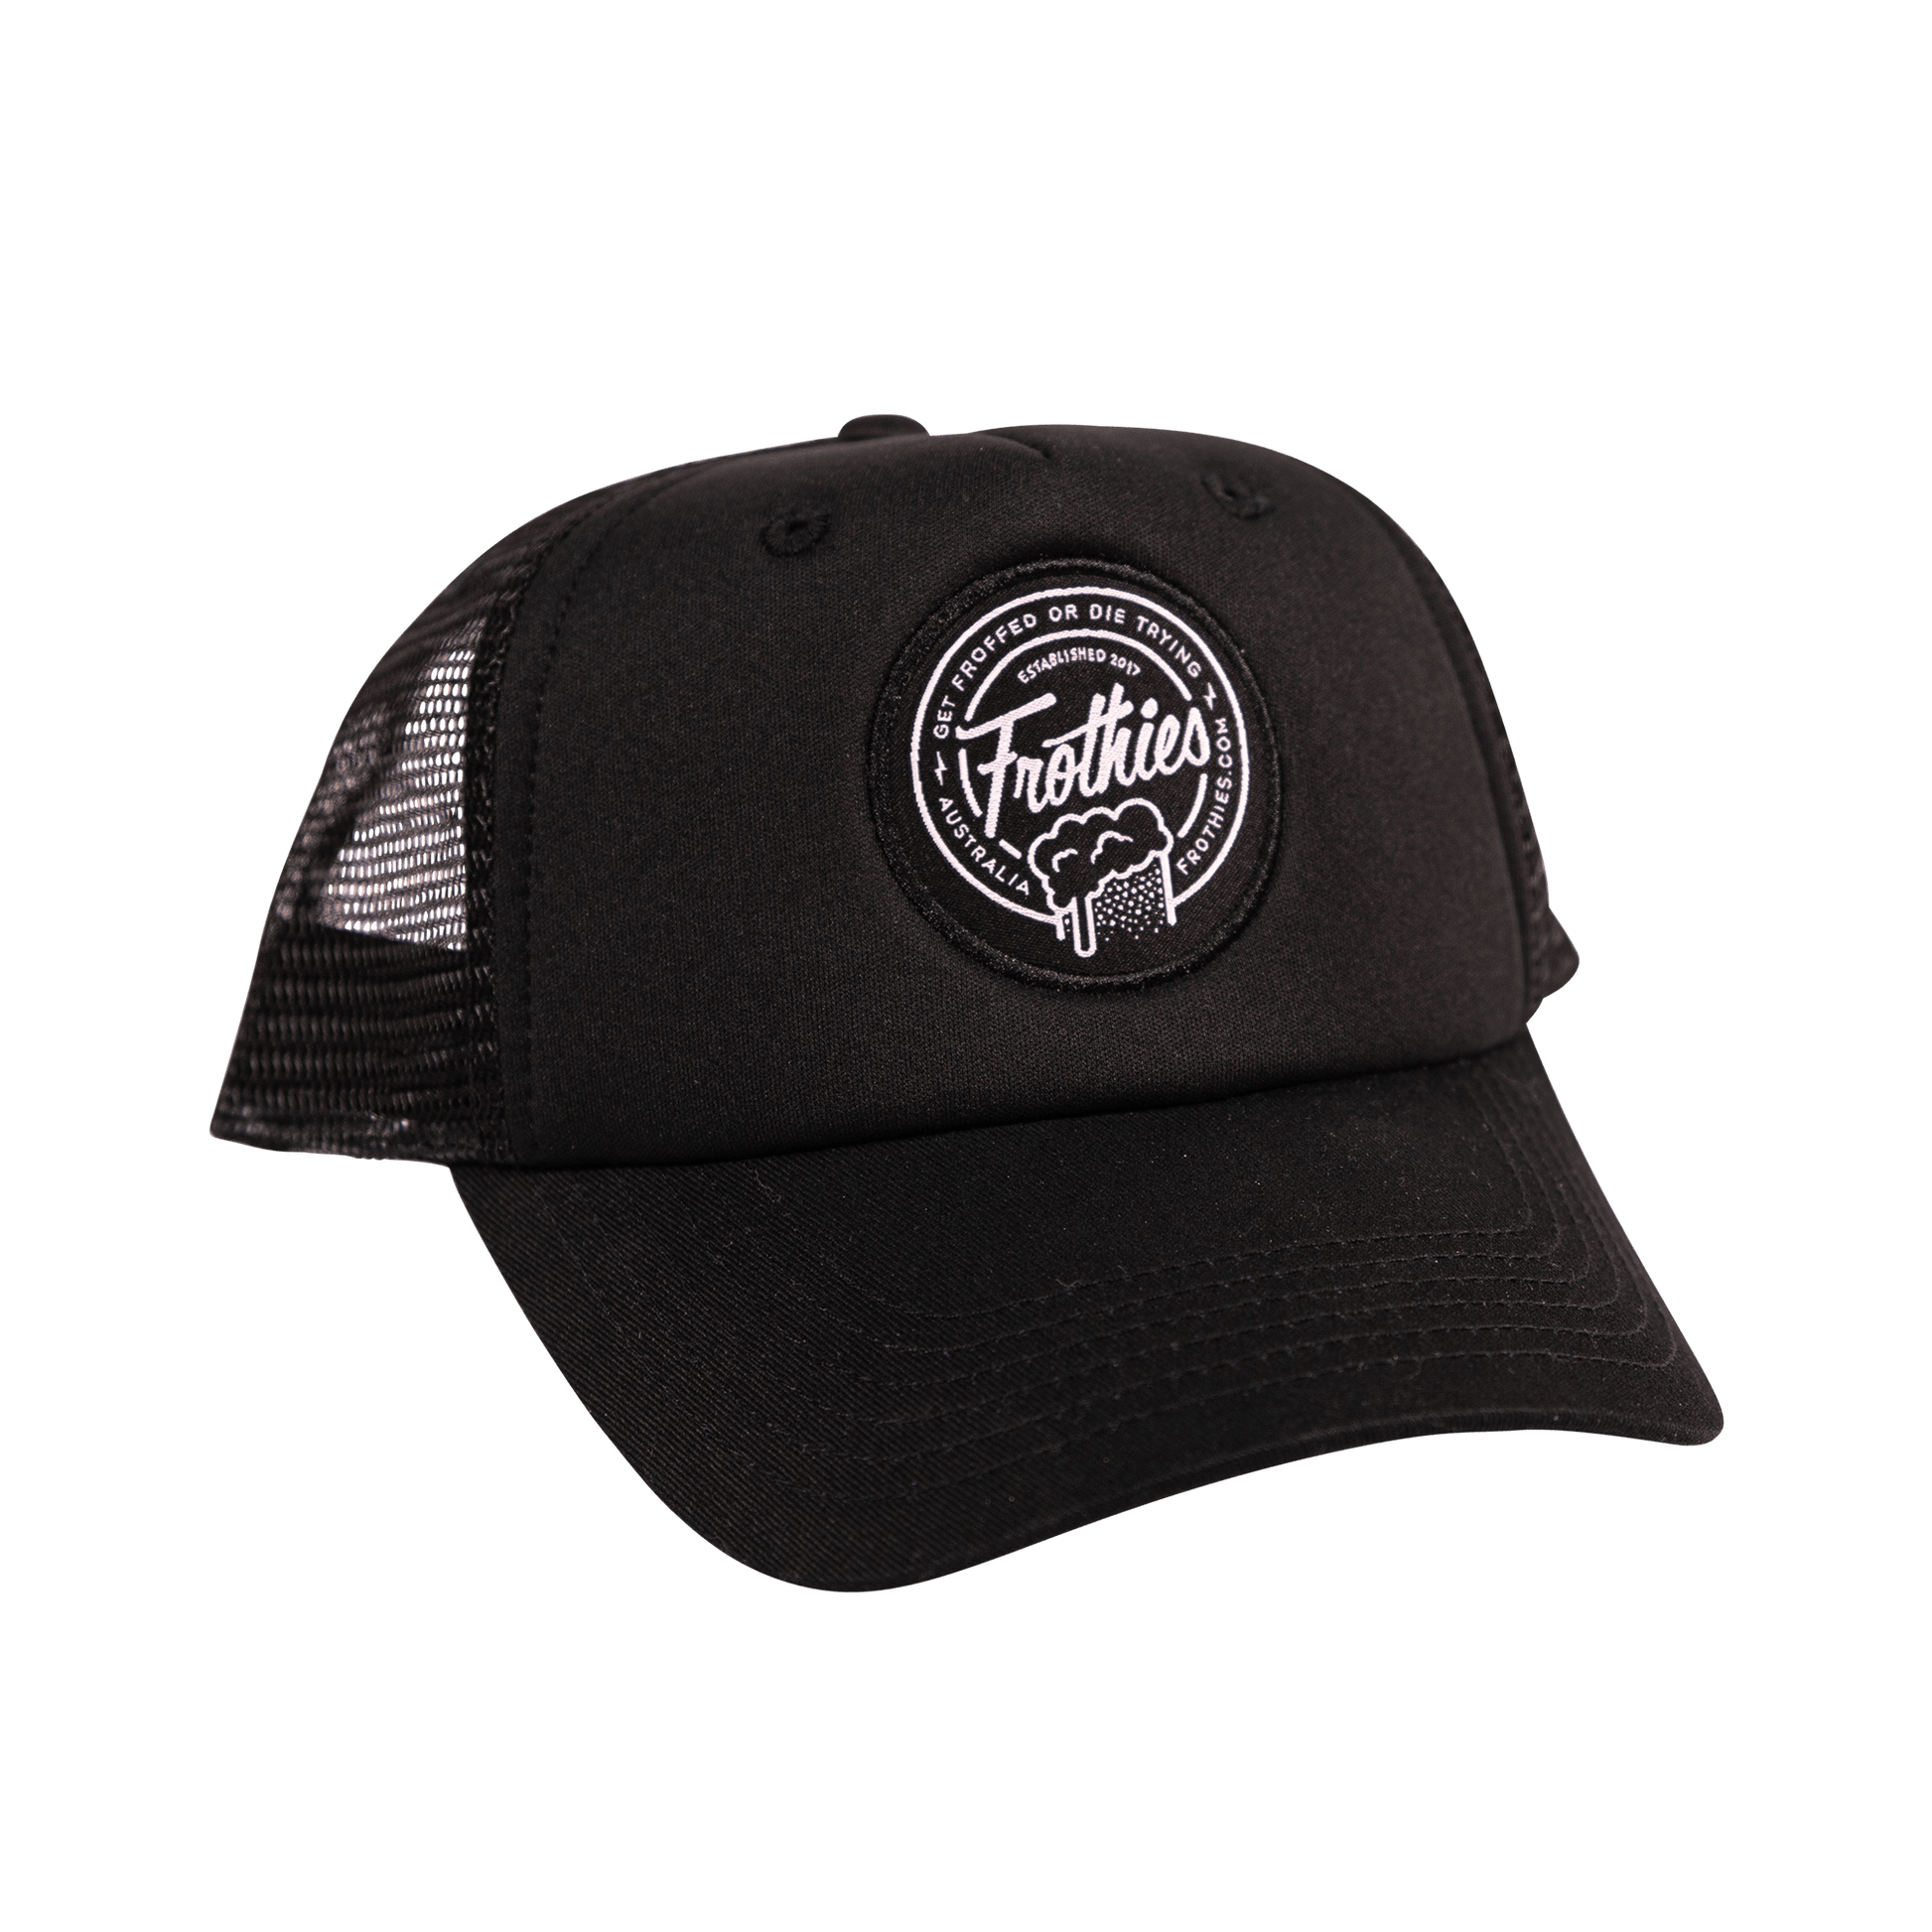 Get Froffed Trucker Black Hat Frothies